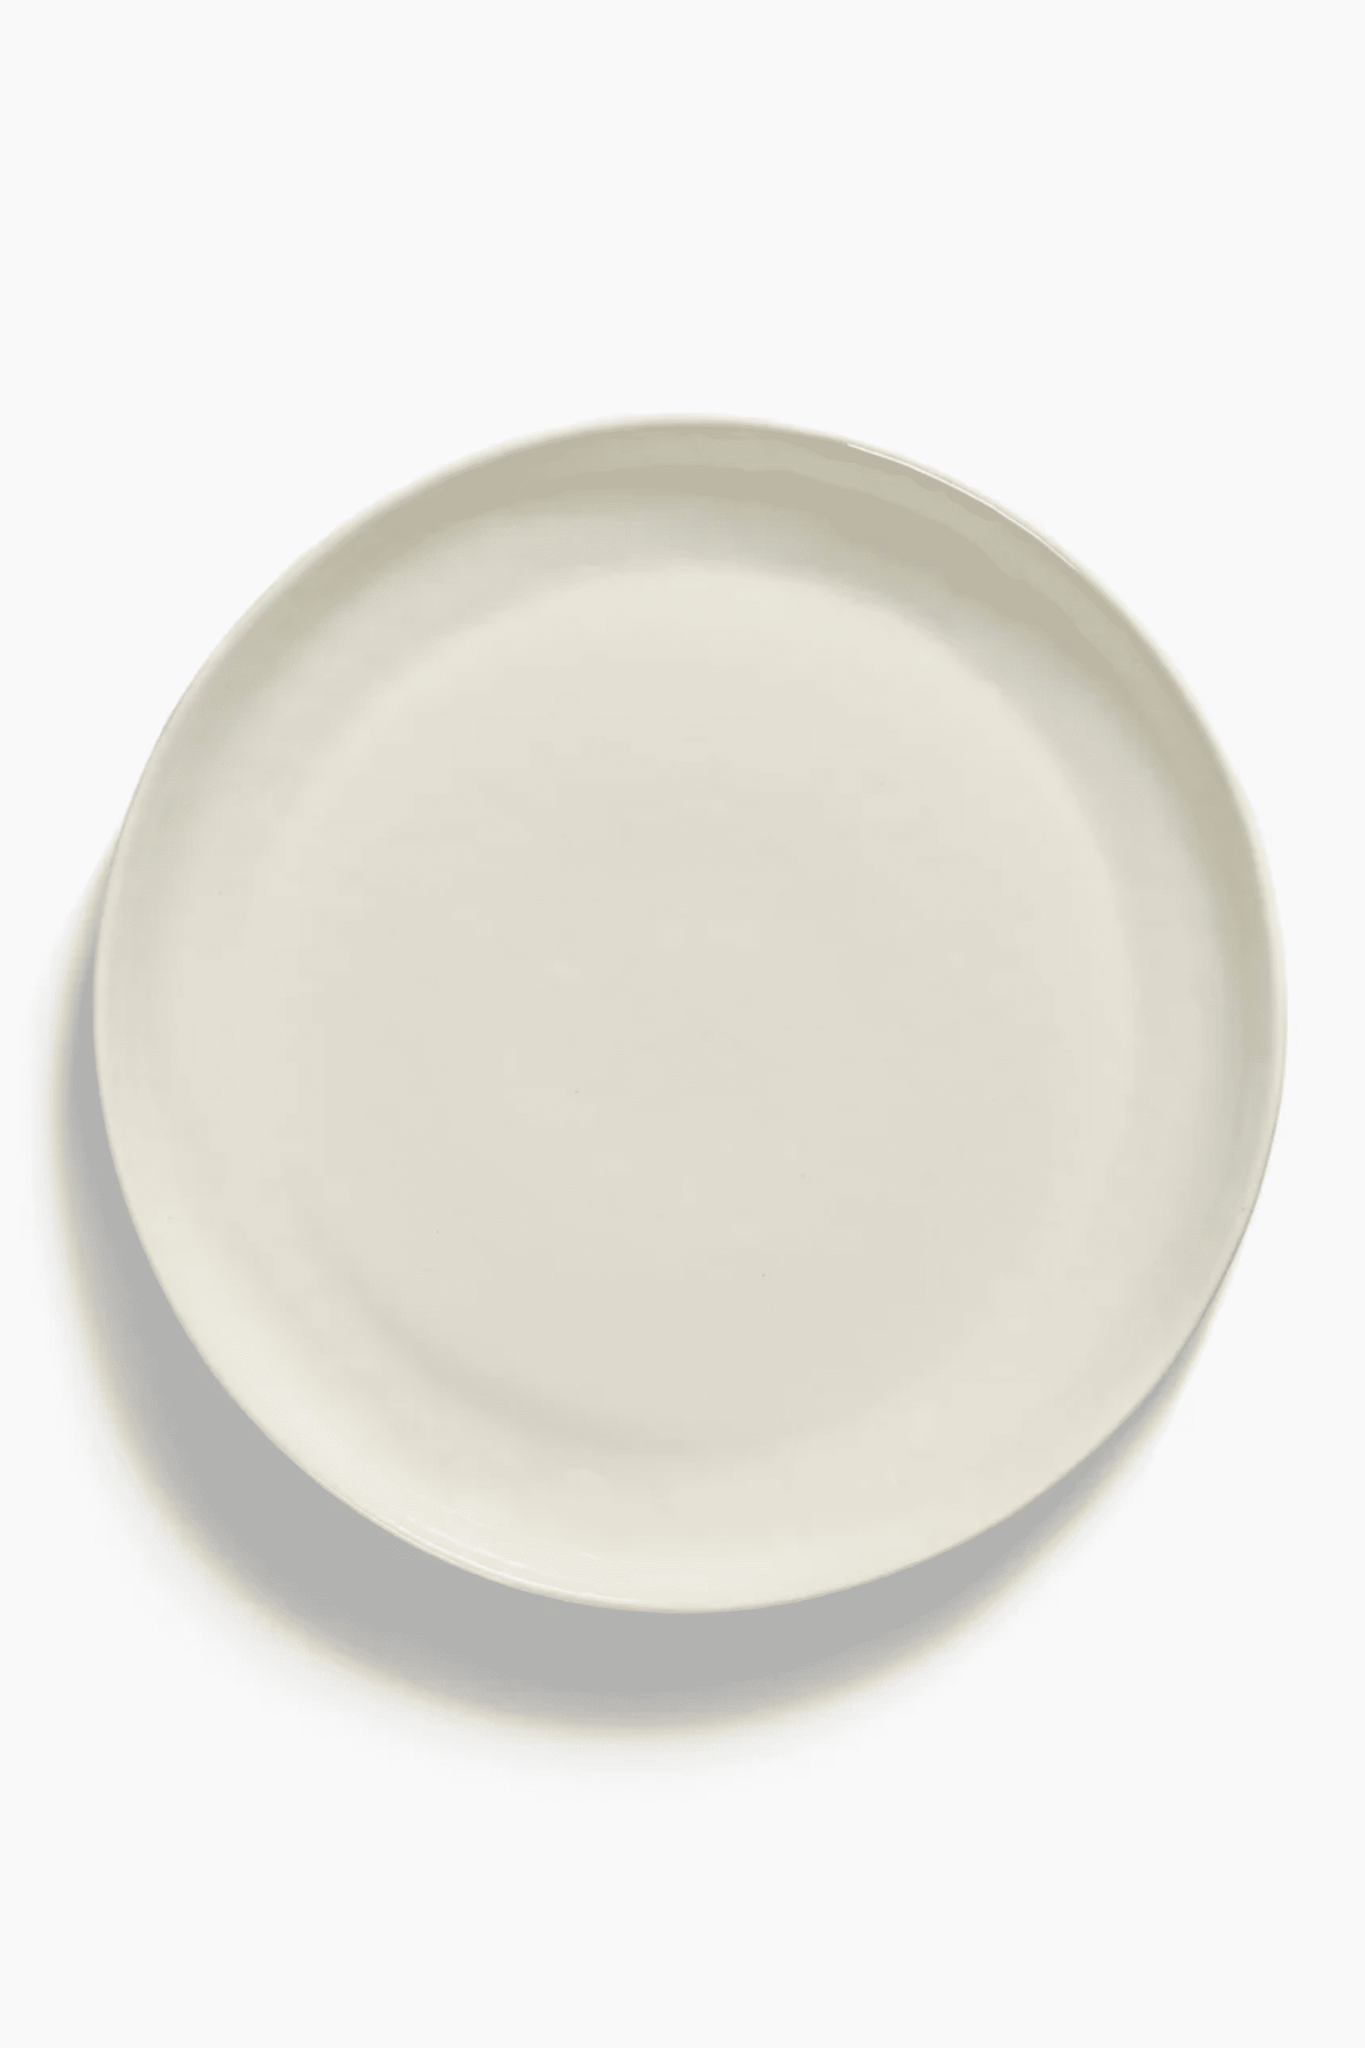 Small Serving Plate, White Swirl with Blue Stripes Ottolenghi Serax, top view